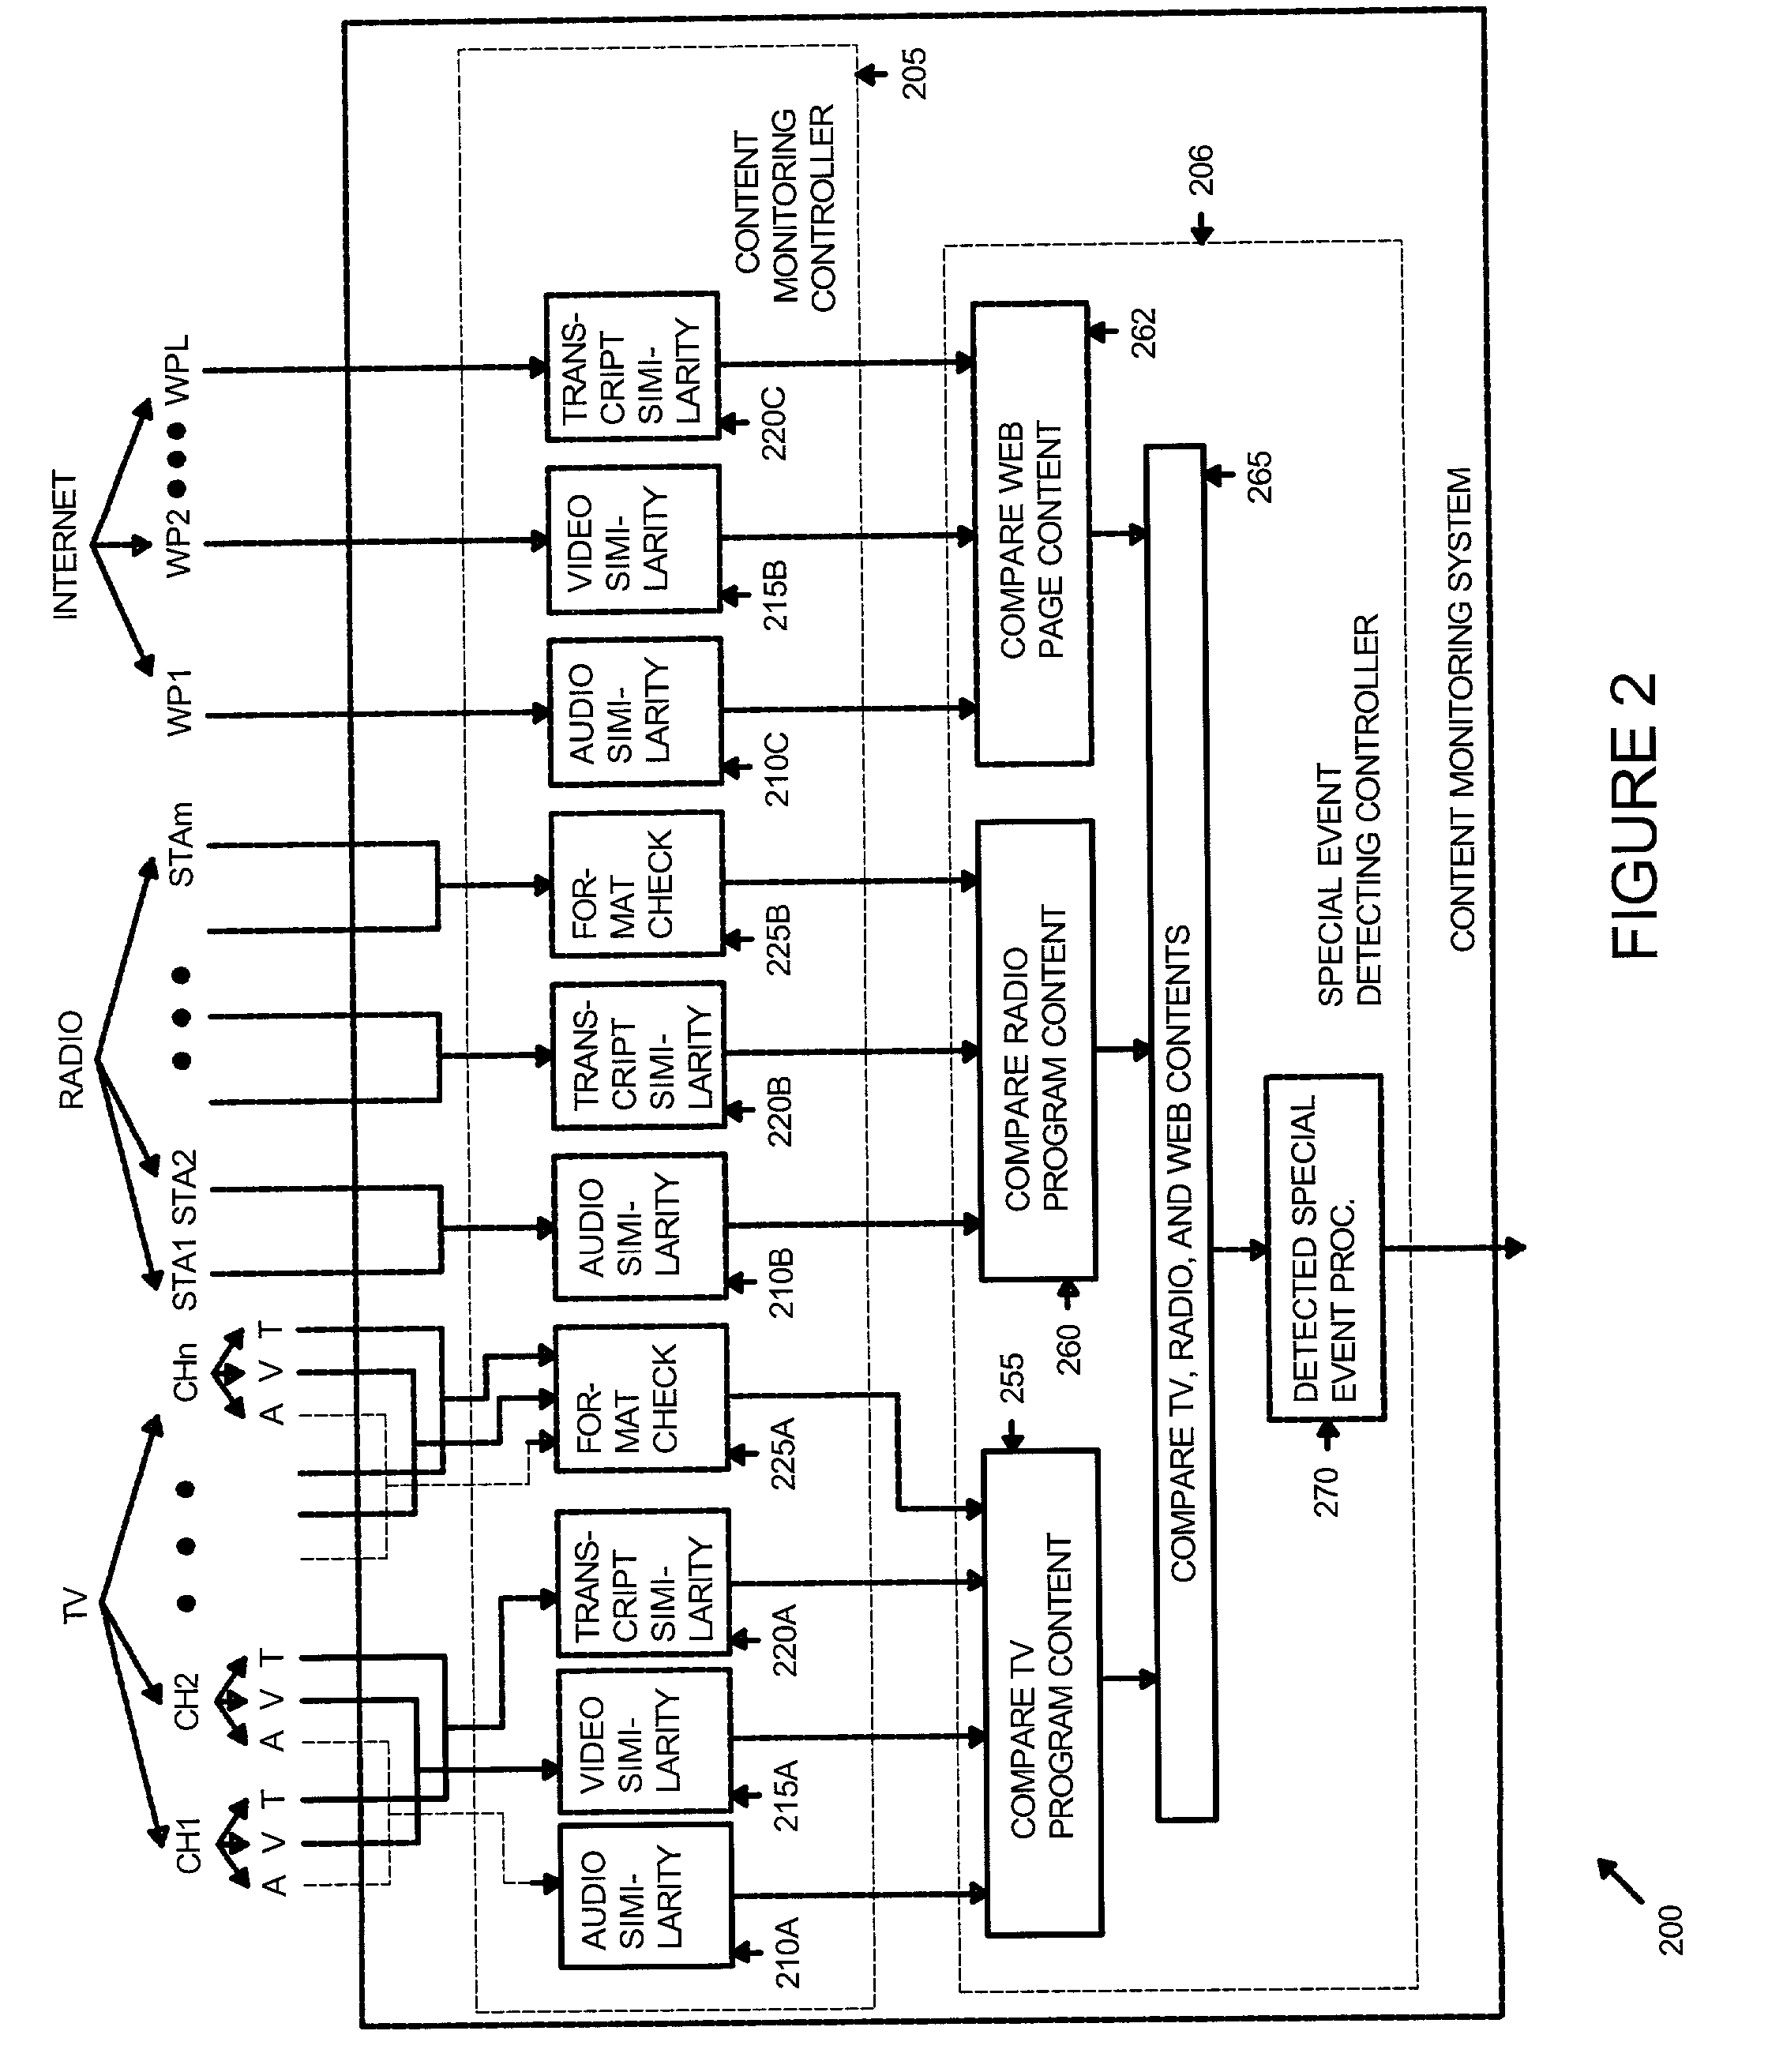 Systems for monitoring broadcast content and generating notification signals as a function of subscriber profiles and methods of operating the same